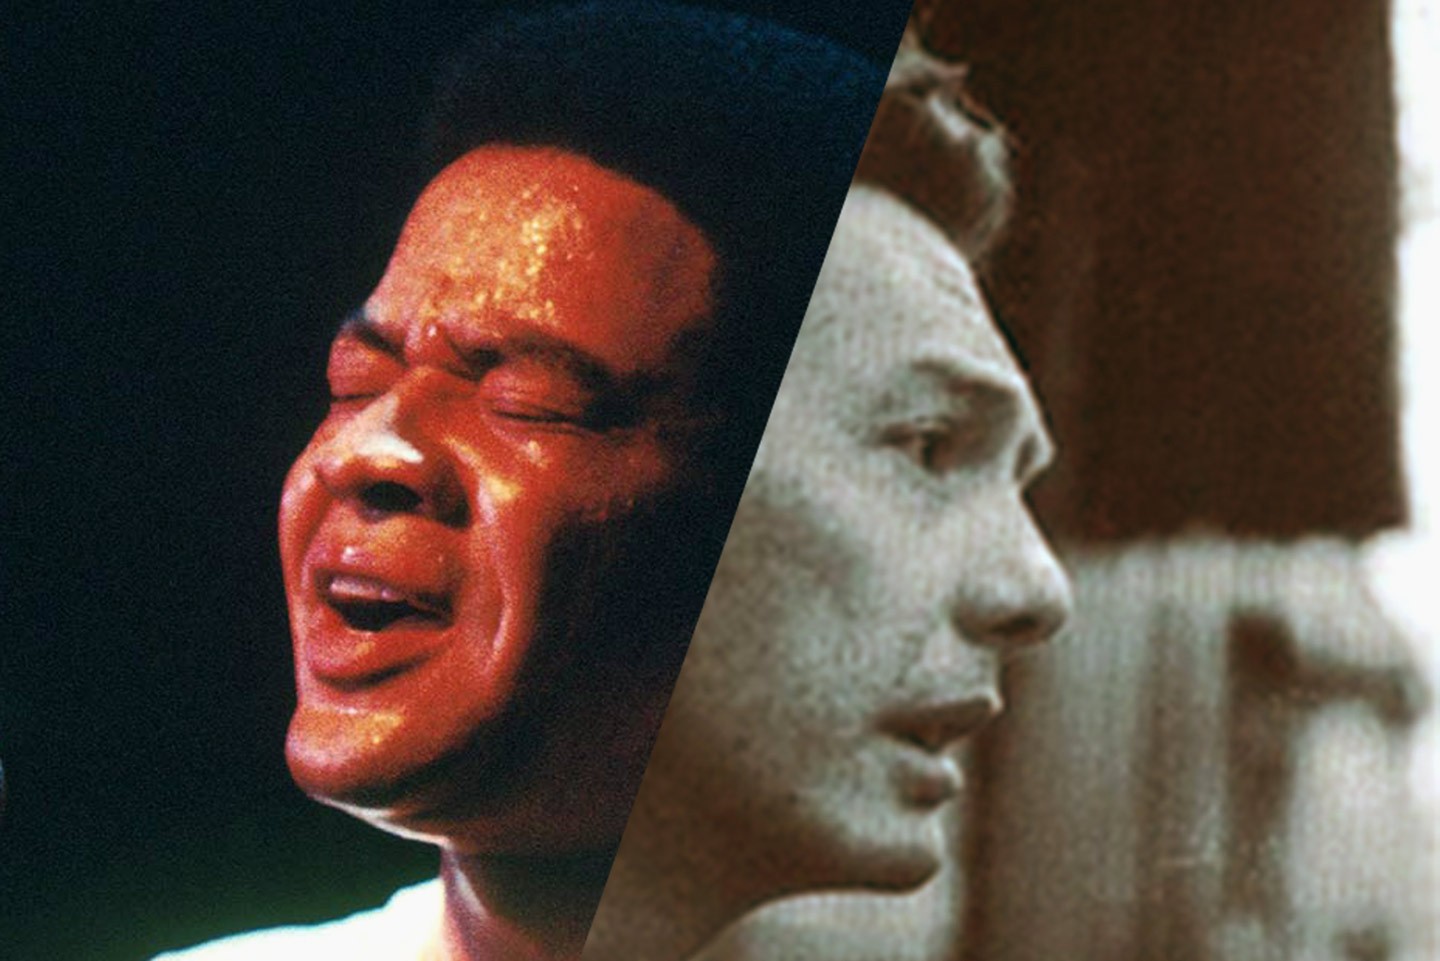 Bill Withers et Fred Neil, génies express